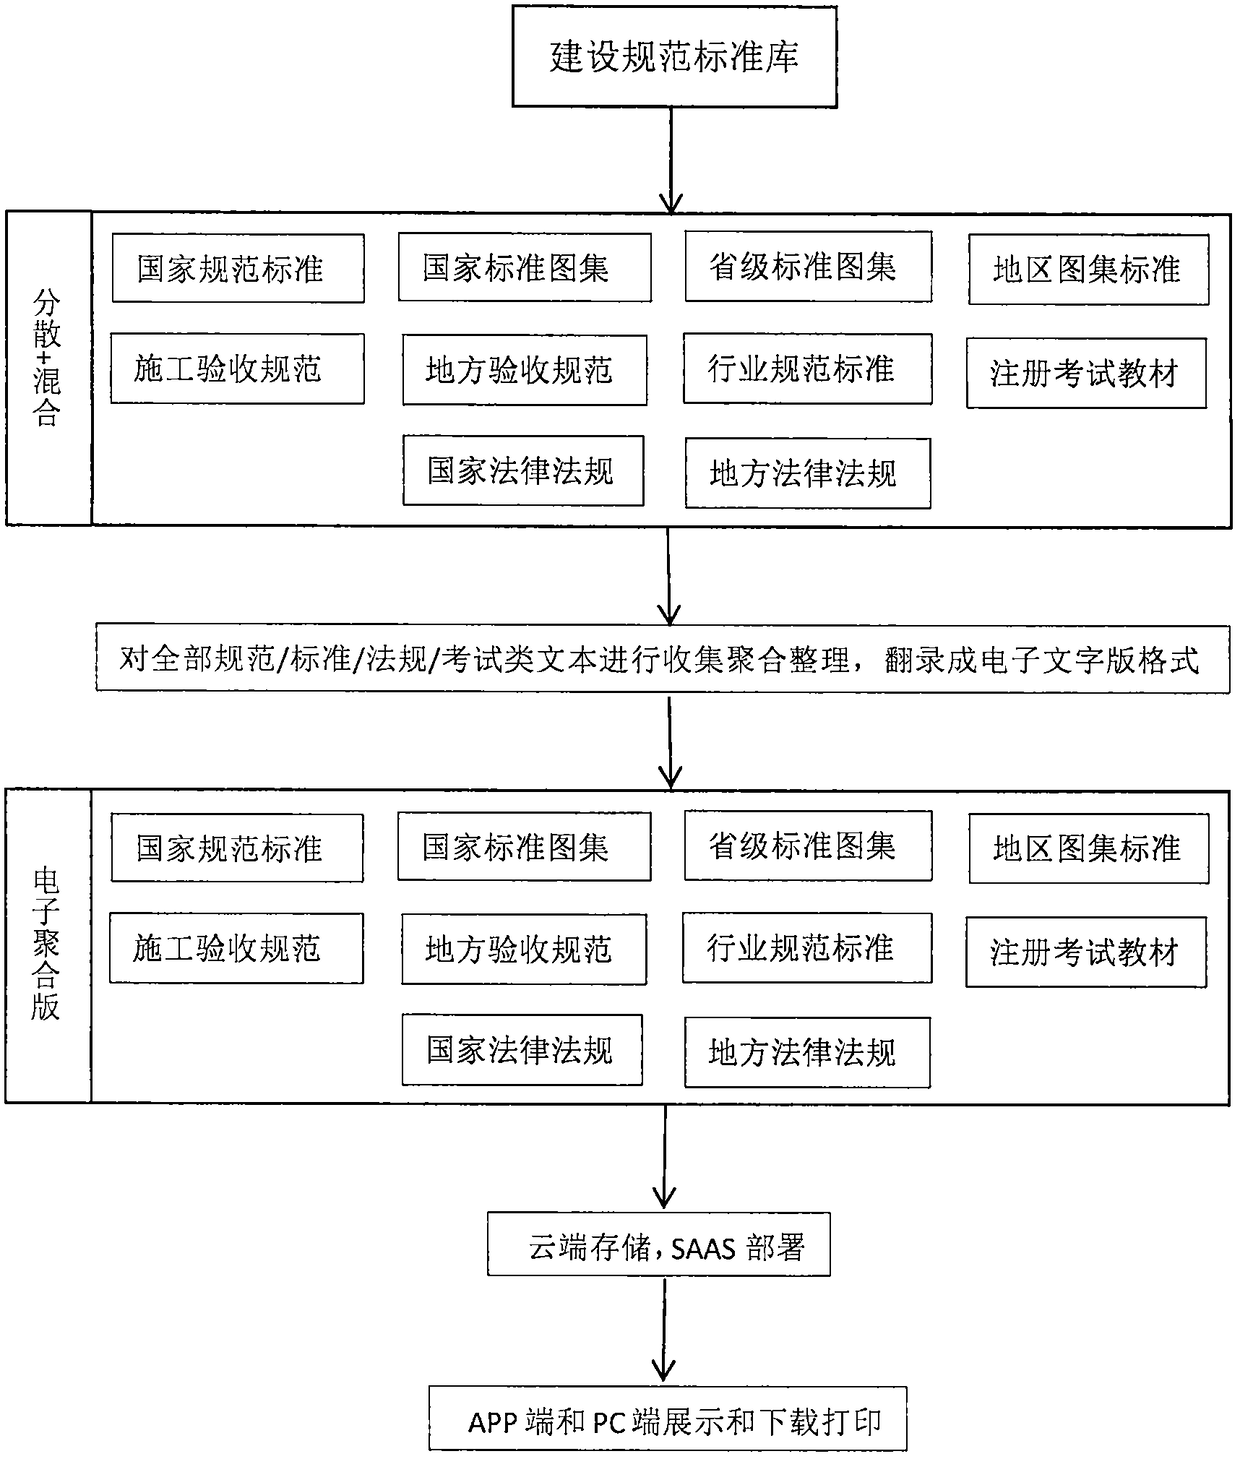 Electronic construction specification standard library application method